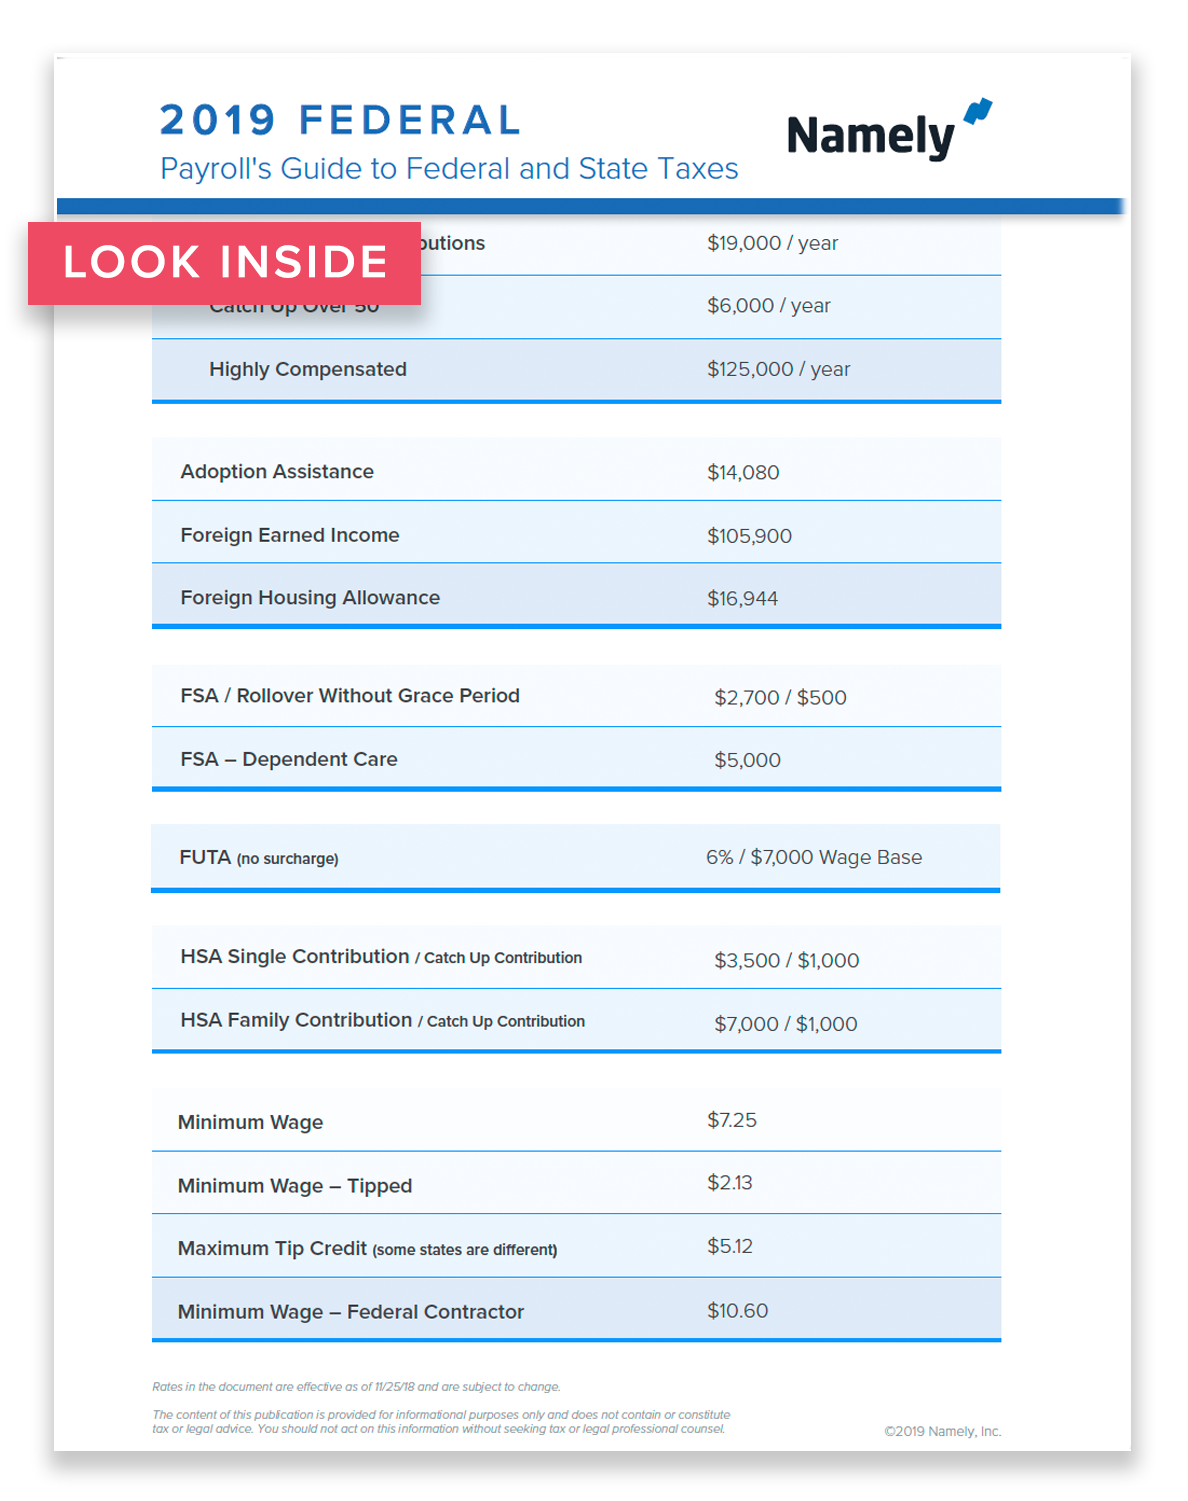 Look Inside Payroll's Guide to Federal and State Taxes